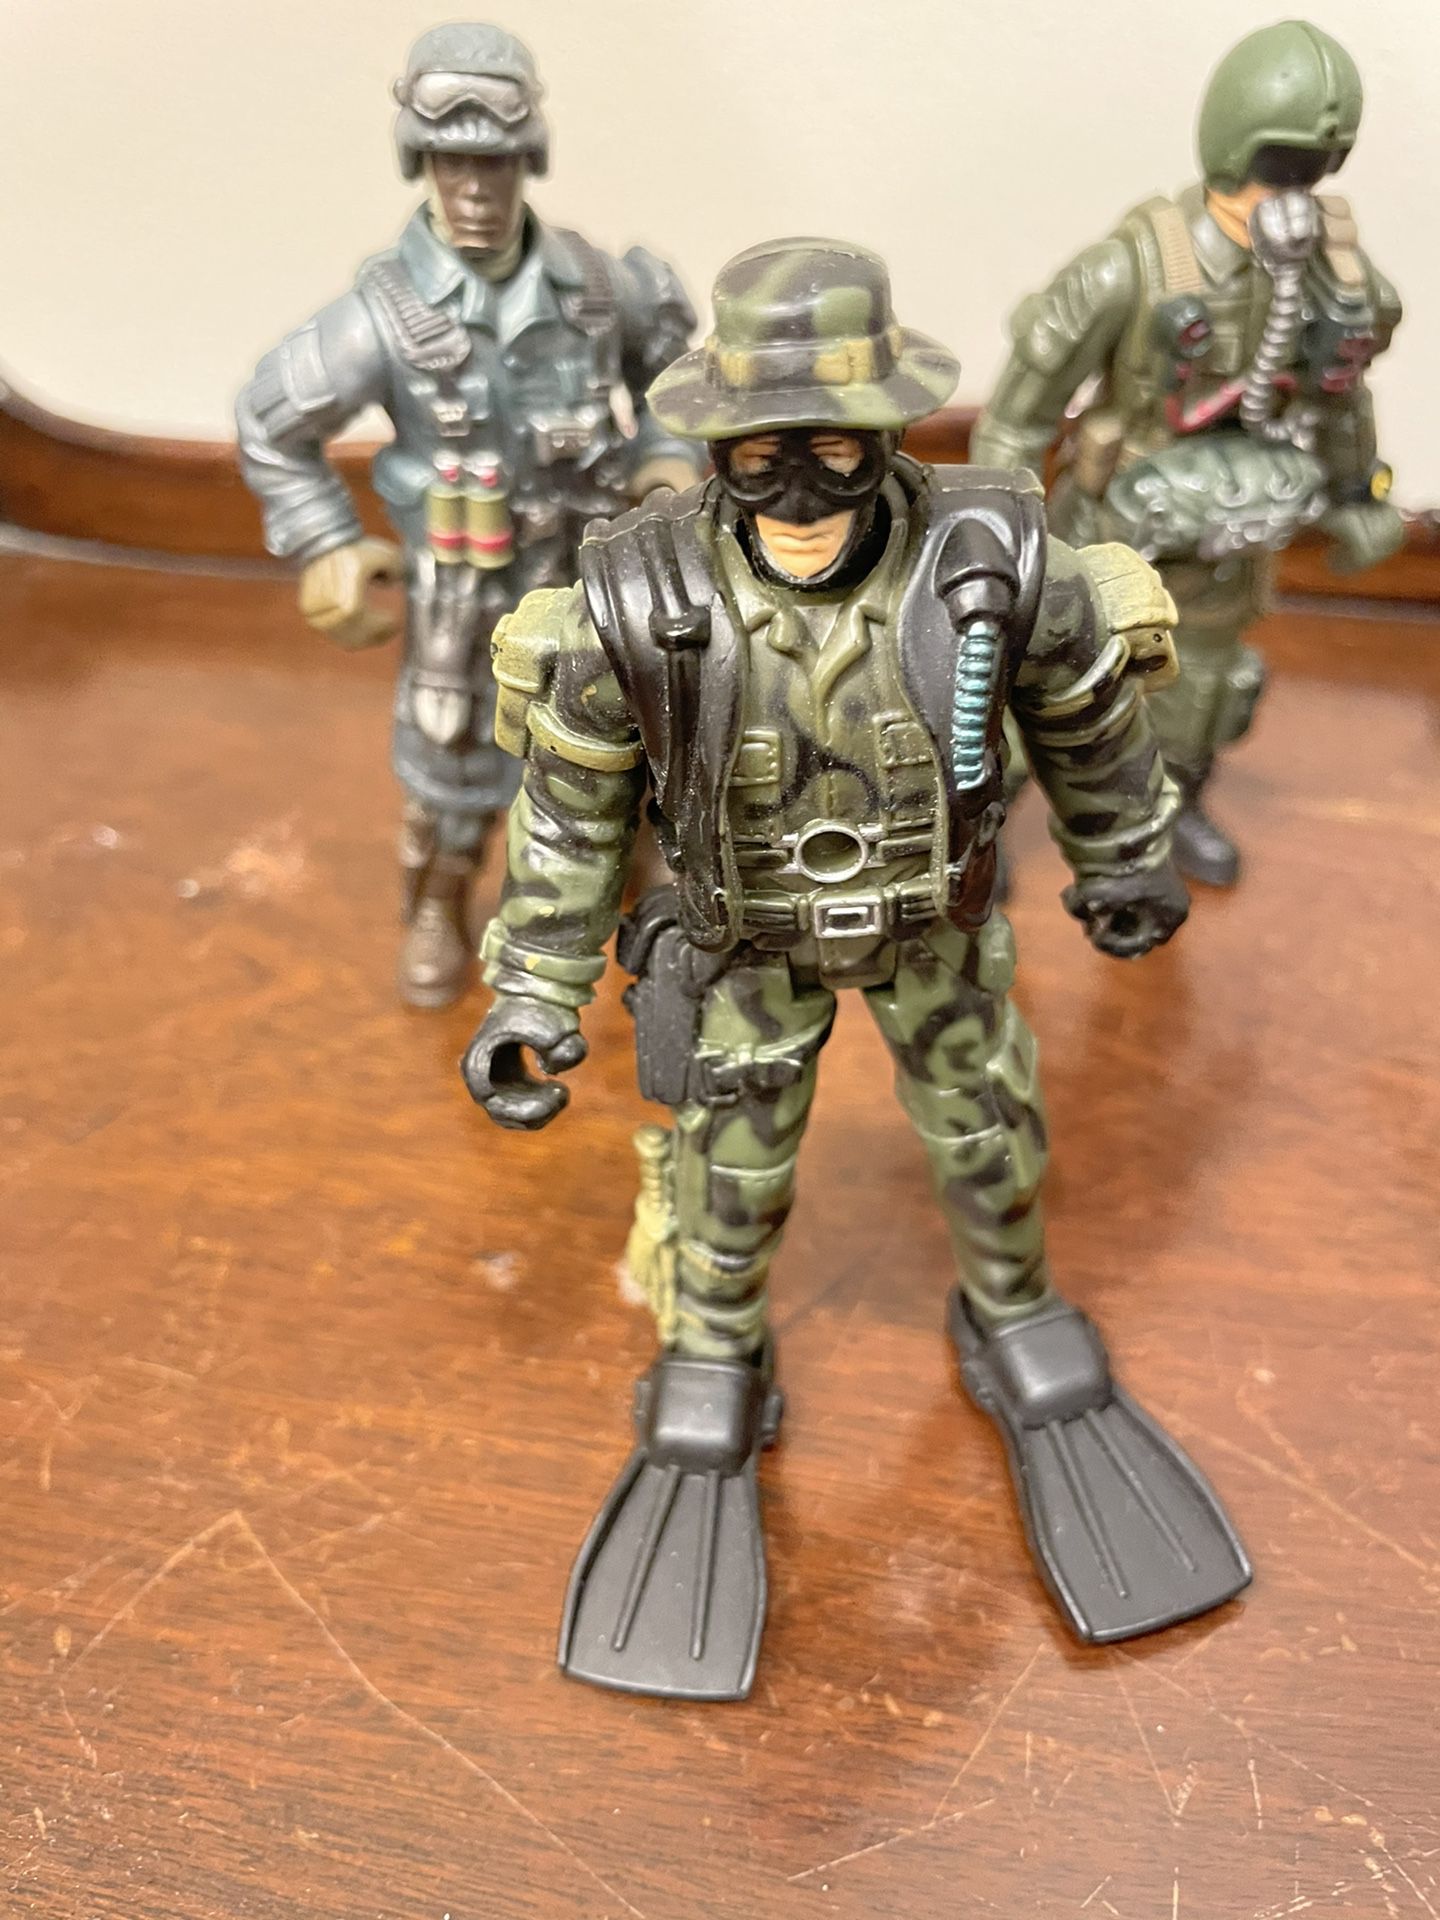 Chap Mei Rescue Squad And Mixed Action Figure Military Lot Of 9. Condition is pre owned and overall very solid and respectable shape. Every figure pic